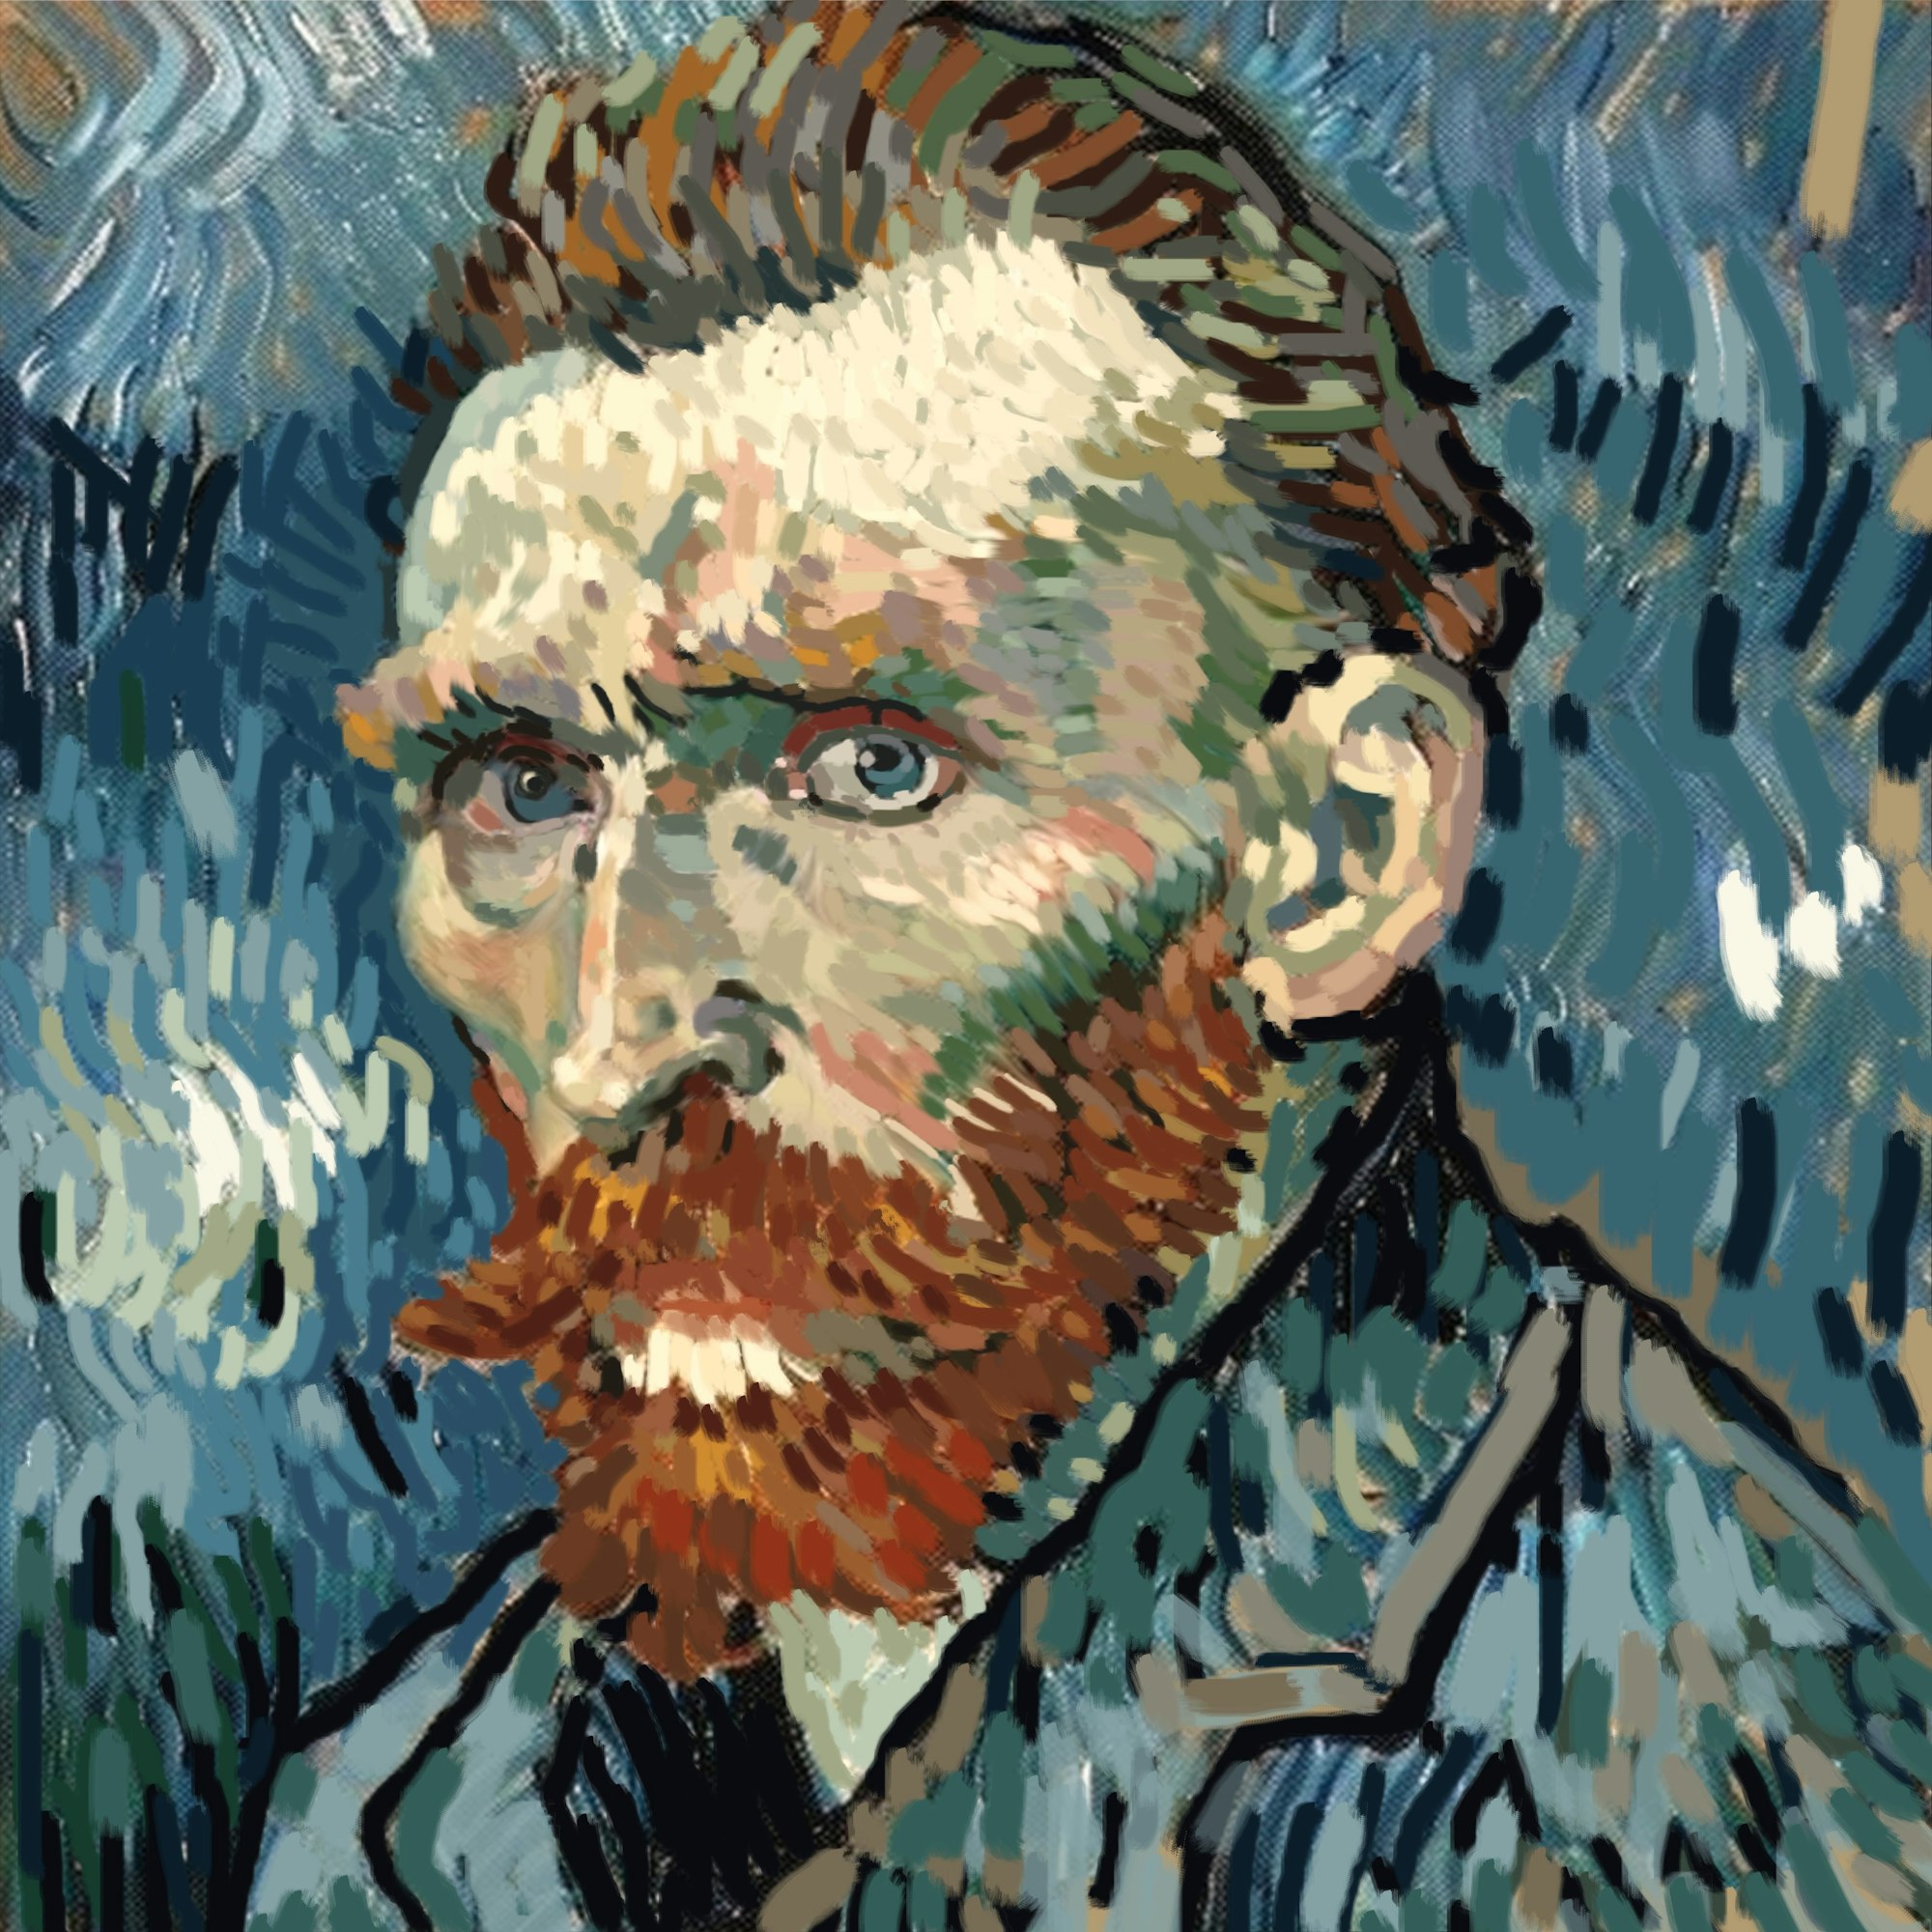 This Van Gogh does not exist